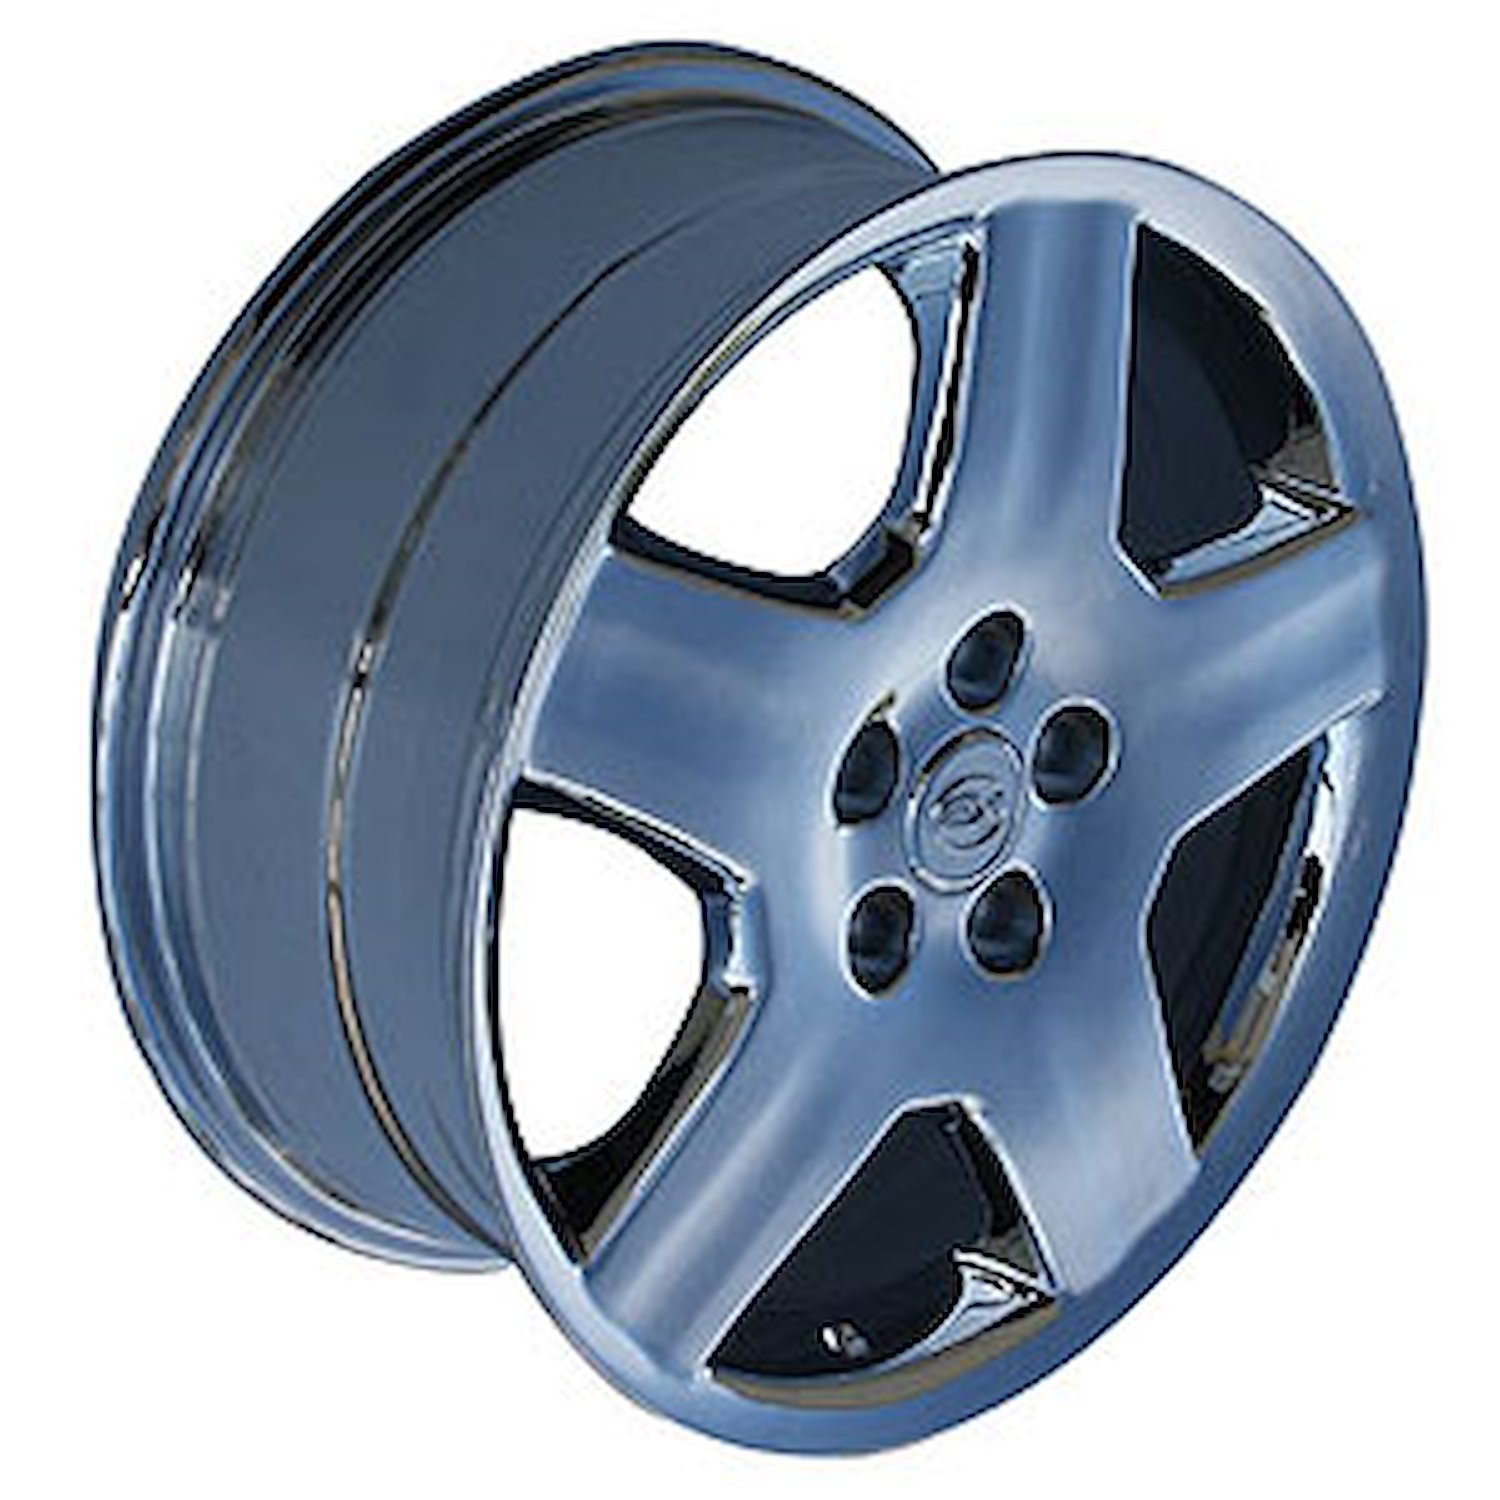 LS 430 Style Size: 18" x 7.5"